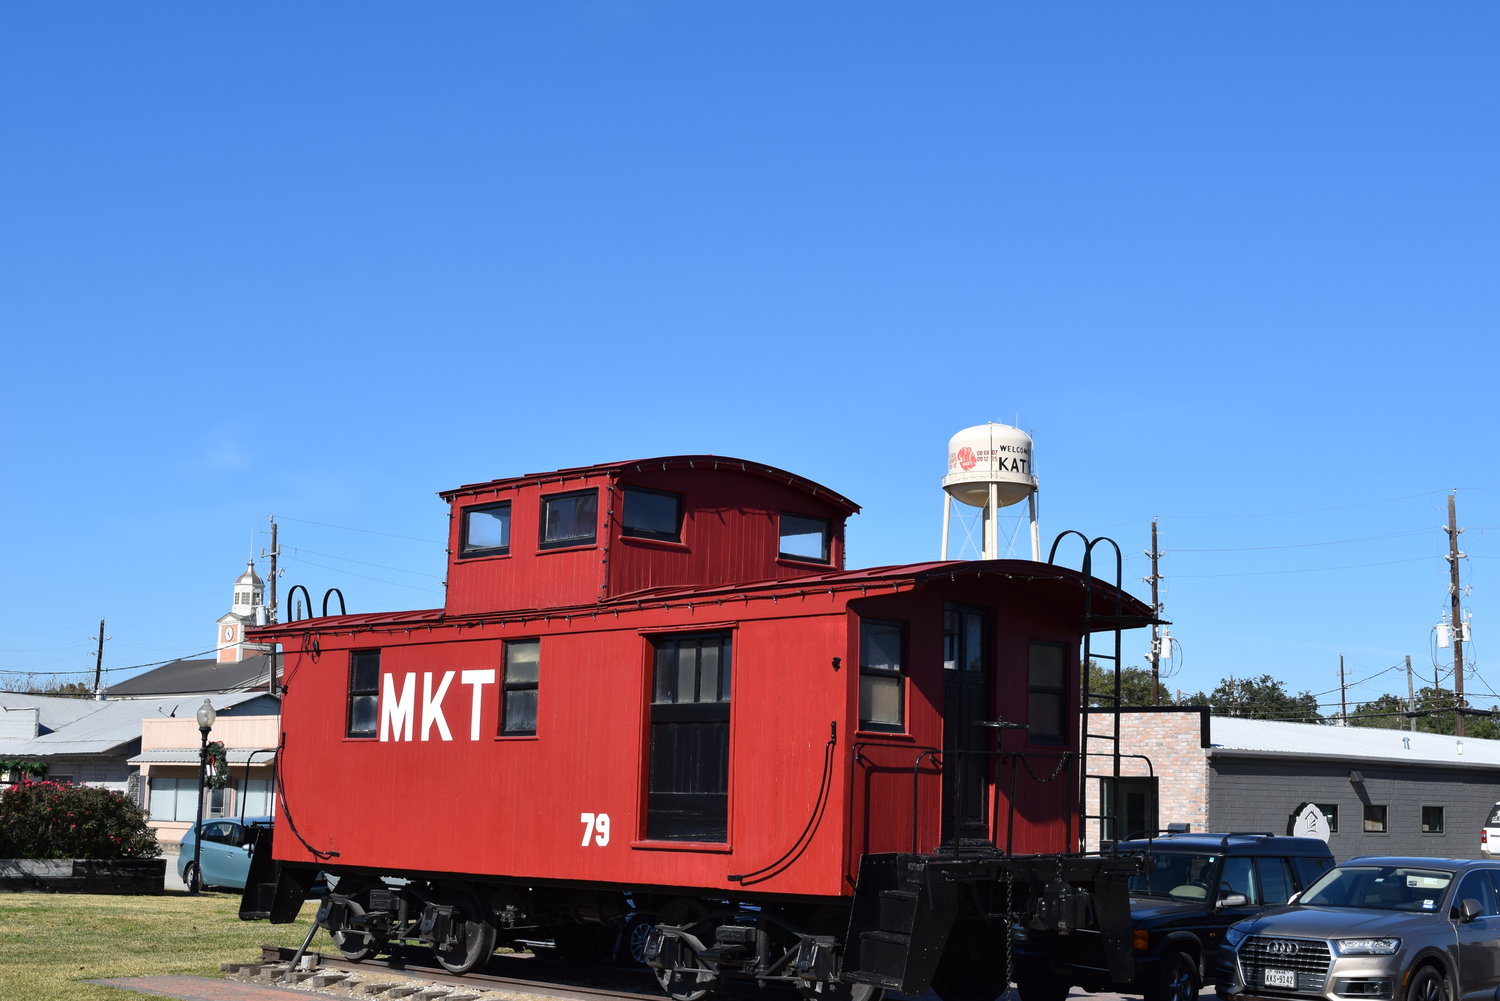 The Katy Heritage Society looks after various historical aspects in Katy including this caboose at Katy Railroad Park.